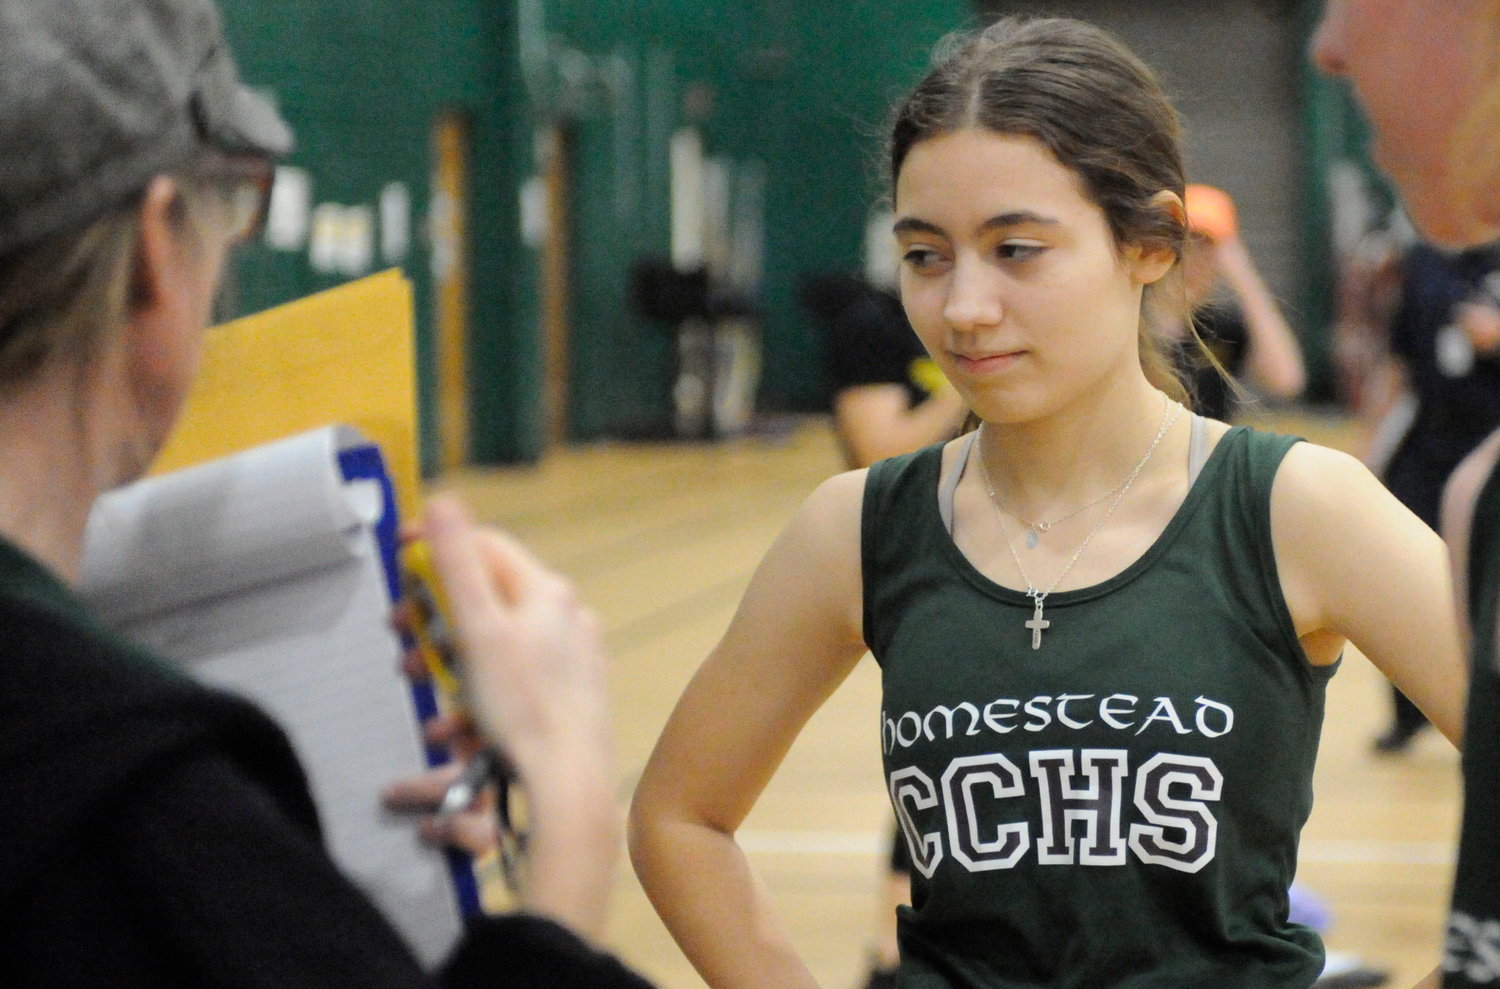 Natalie Westergreen, a sophomore, runs the 55-meter and 300-meter races. She is pictured checking her times with Coach Shannon.